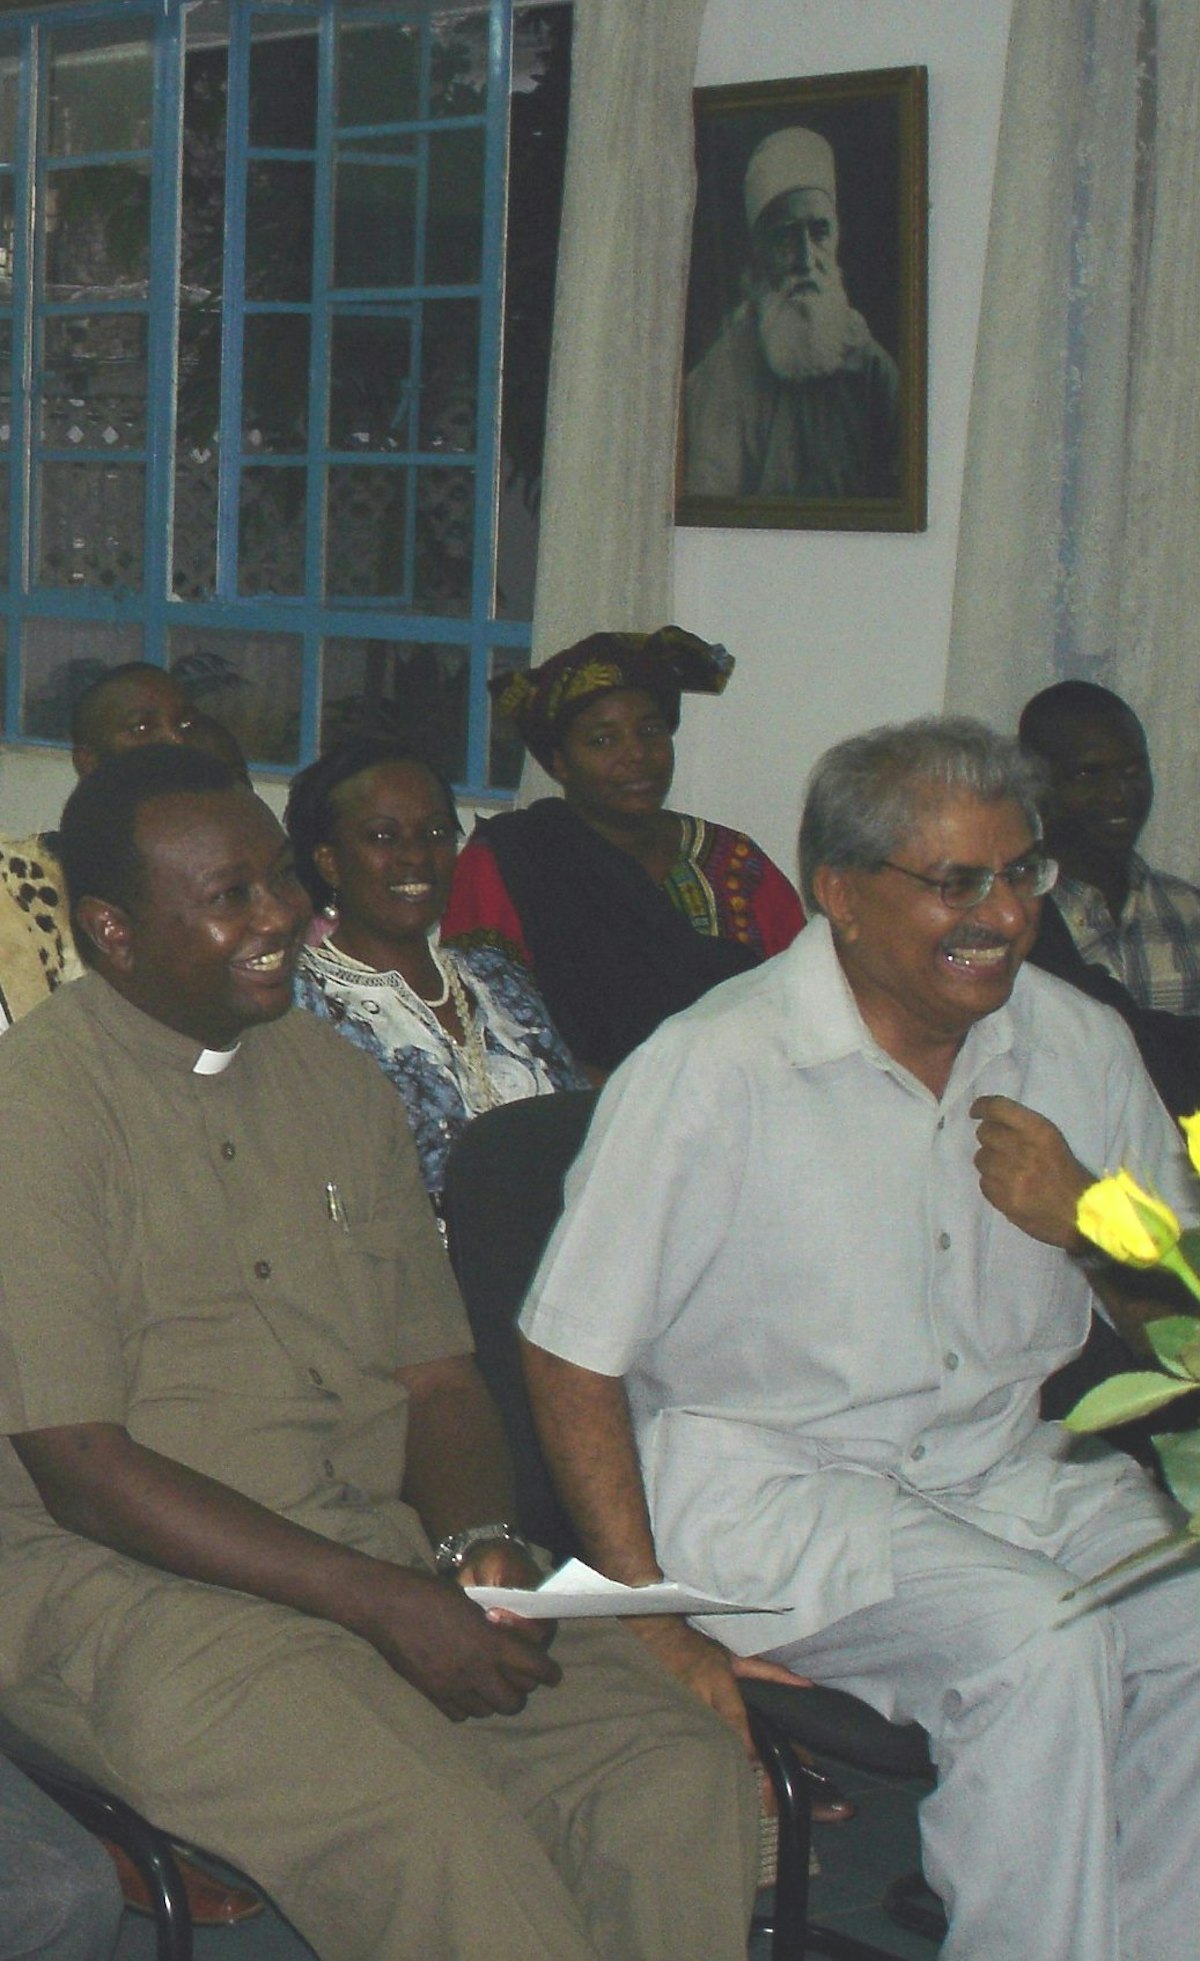 A lighthearted moment during discussions at the International Day of Peace gathering organised by the Baha'is of Tanzania.(Front row) Secretary of interrelations dialogue of the Catholic Church Rev. Father Gallus Marandu (left), Aga Khan Council representative Dr Navruz Lakhani.